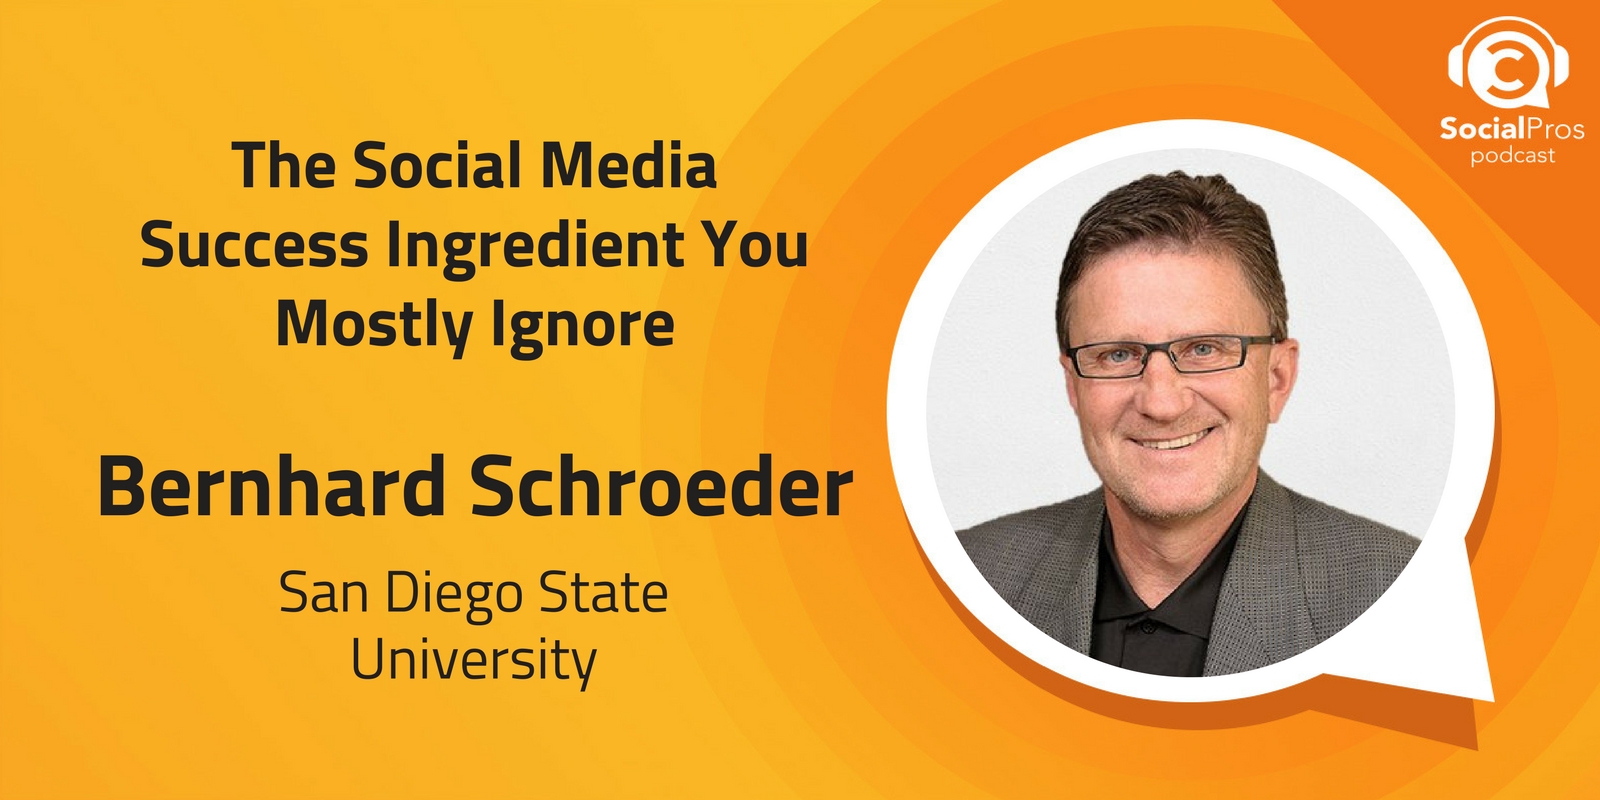 The Social Media Success Ingredient You Mostly Ignore